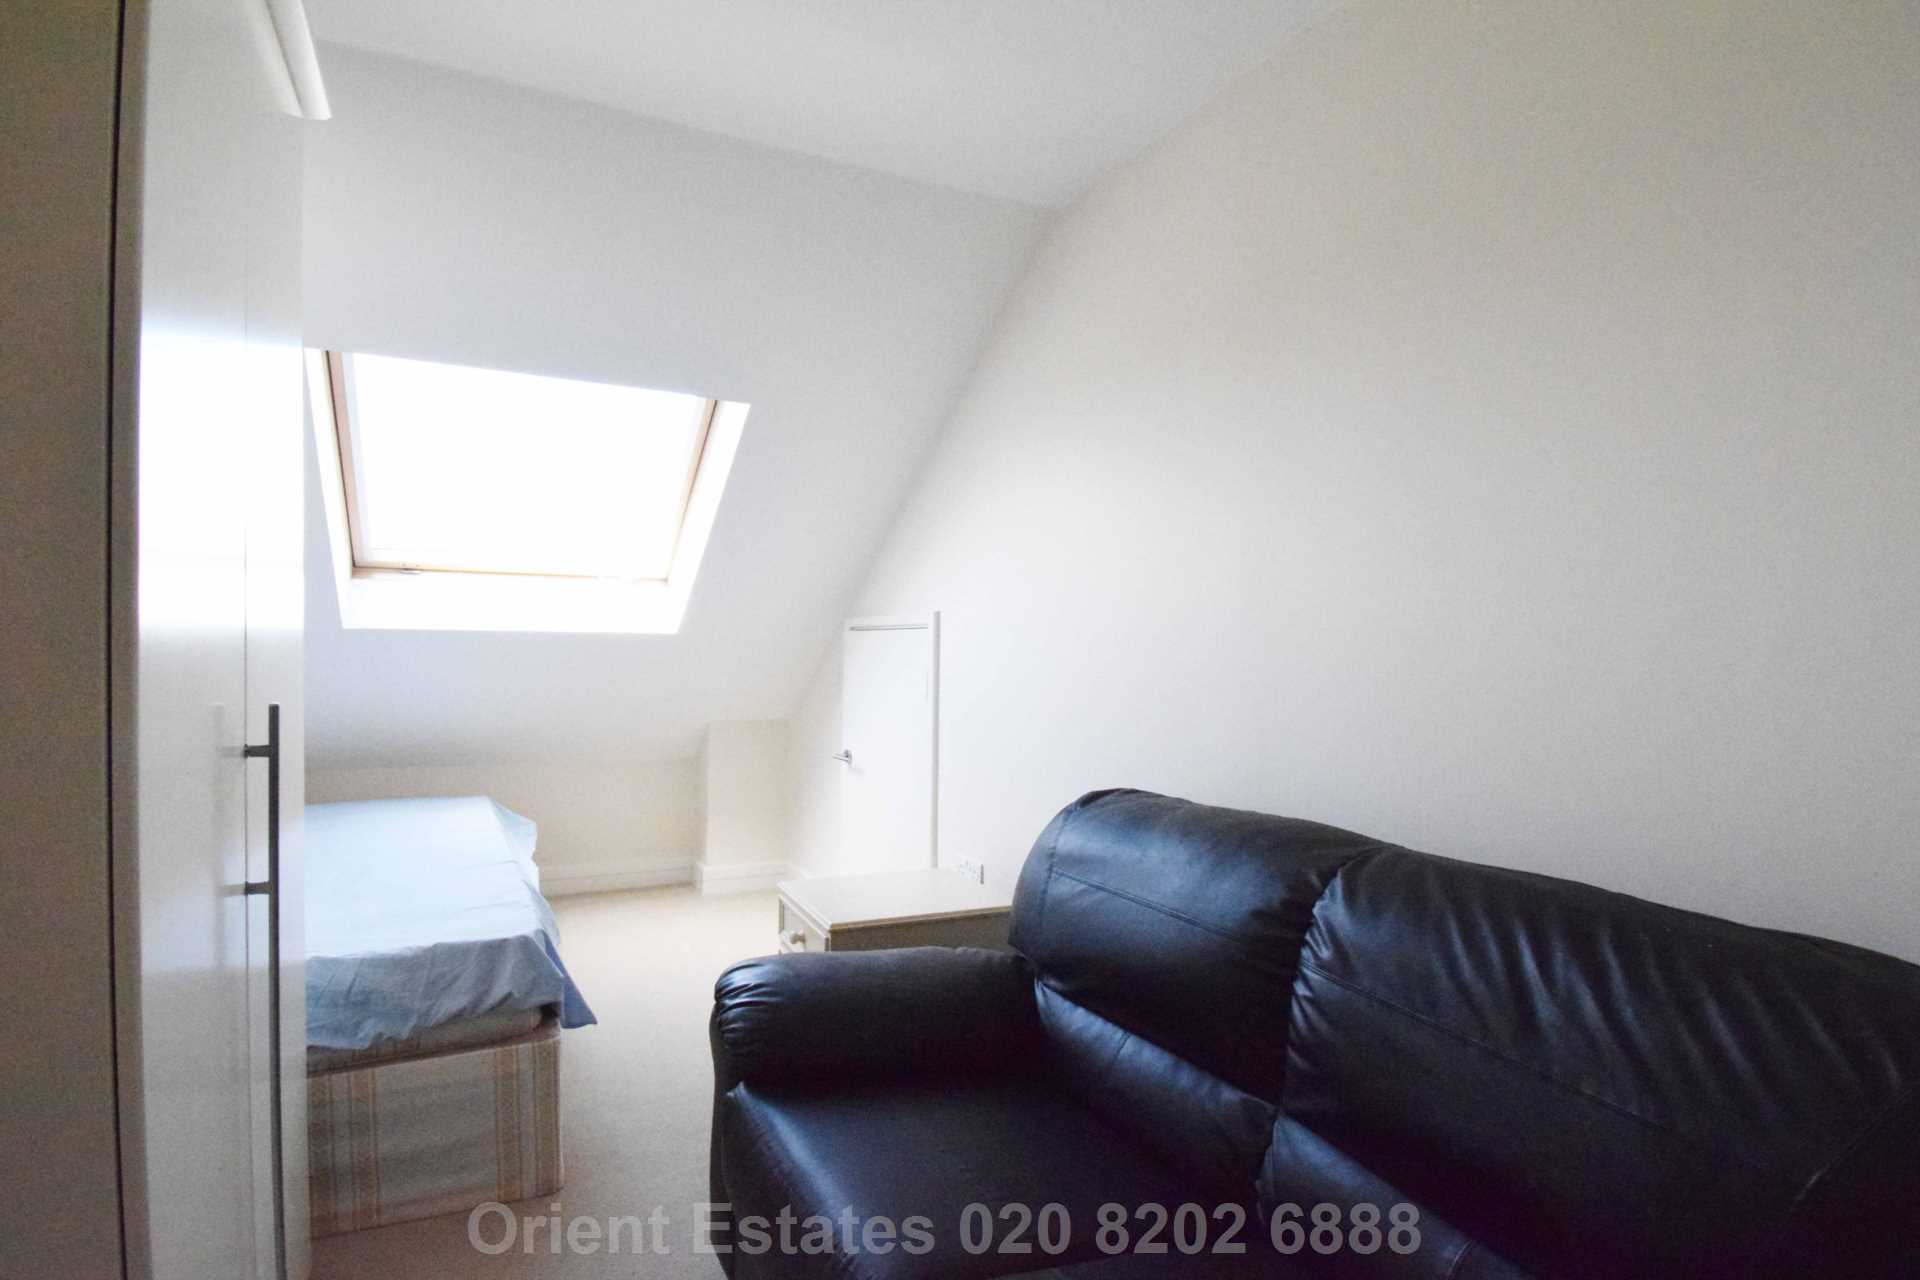 Peaberry Court, Hendon, NW4, Image 15